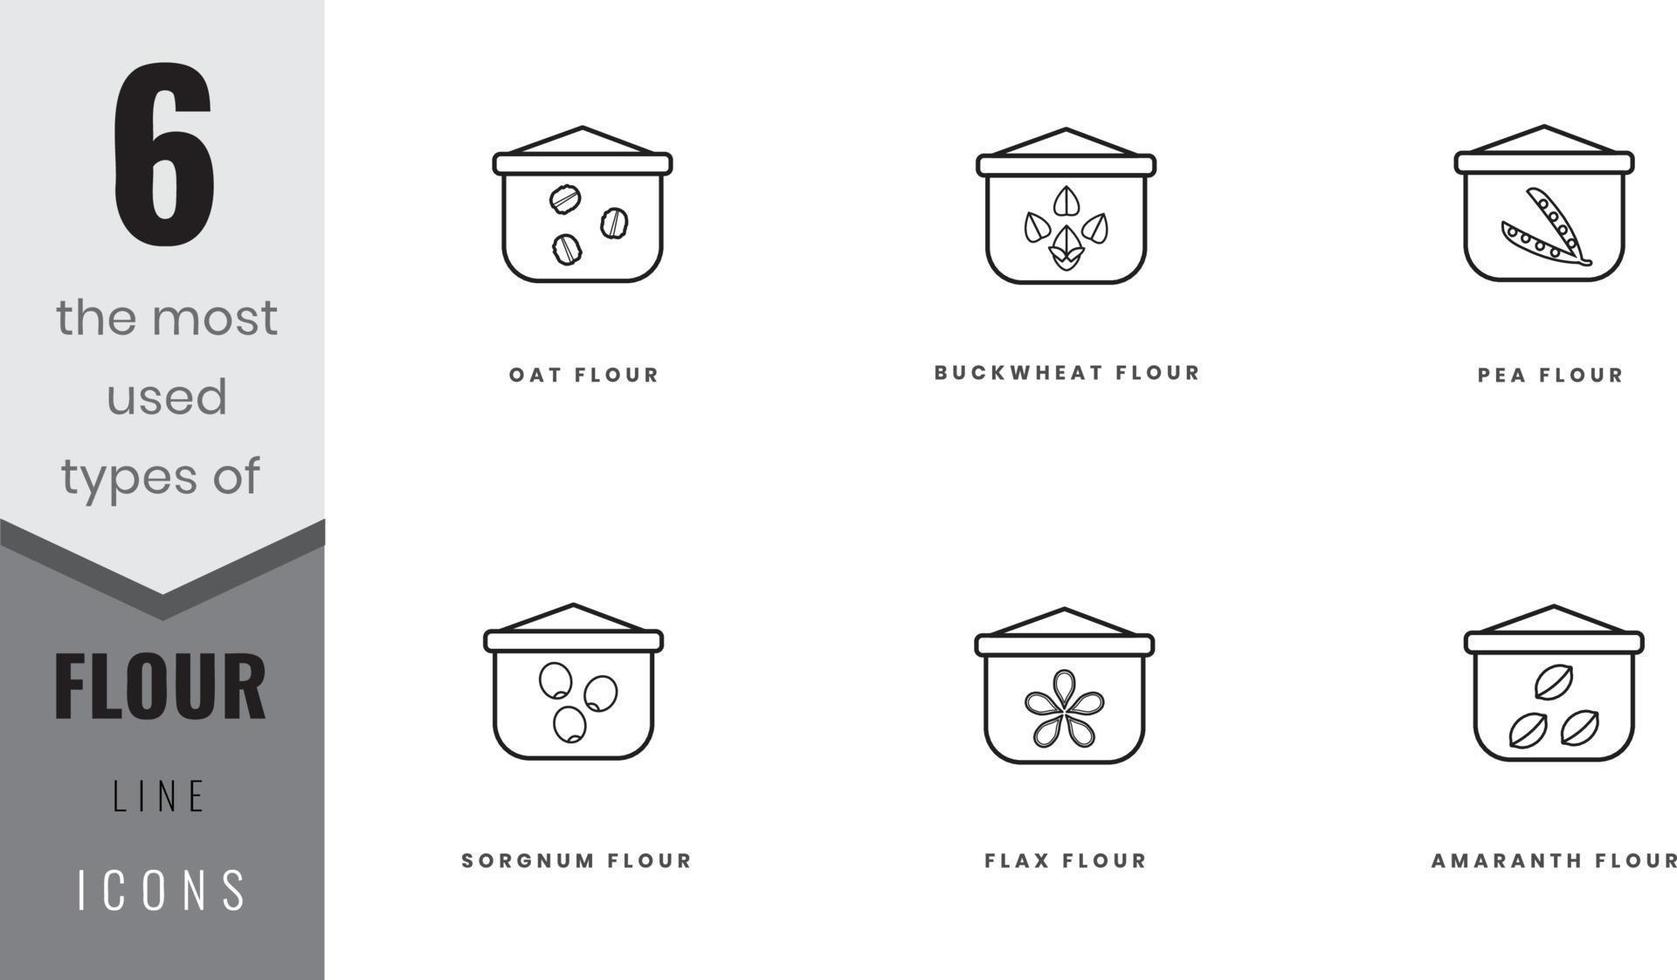 The most used types of flour line icons. Flax, amaranth, oat, buckwheat, pea and sorgnum. In lineart, outline, solid, colored styles. For website design, mobile app, software vector